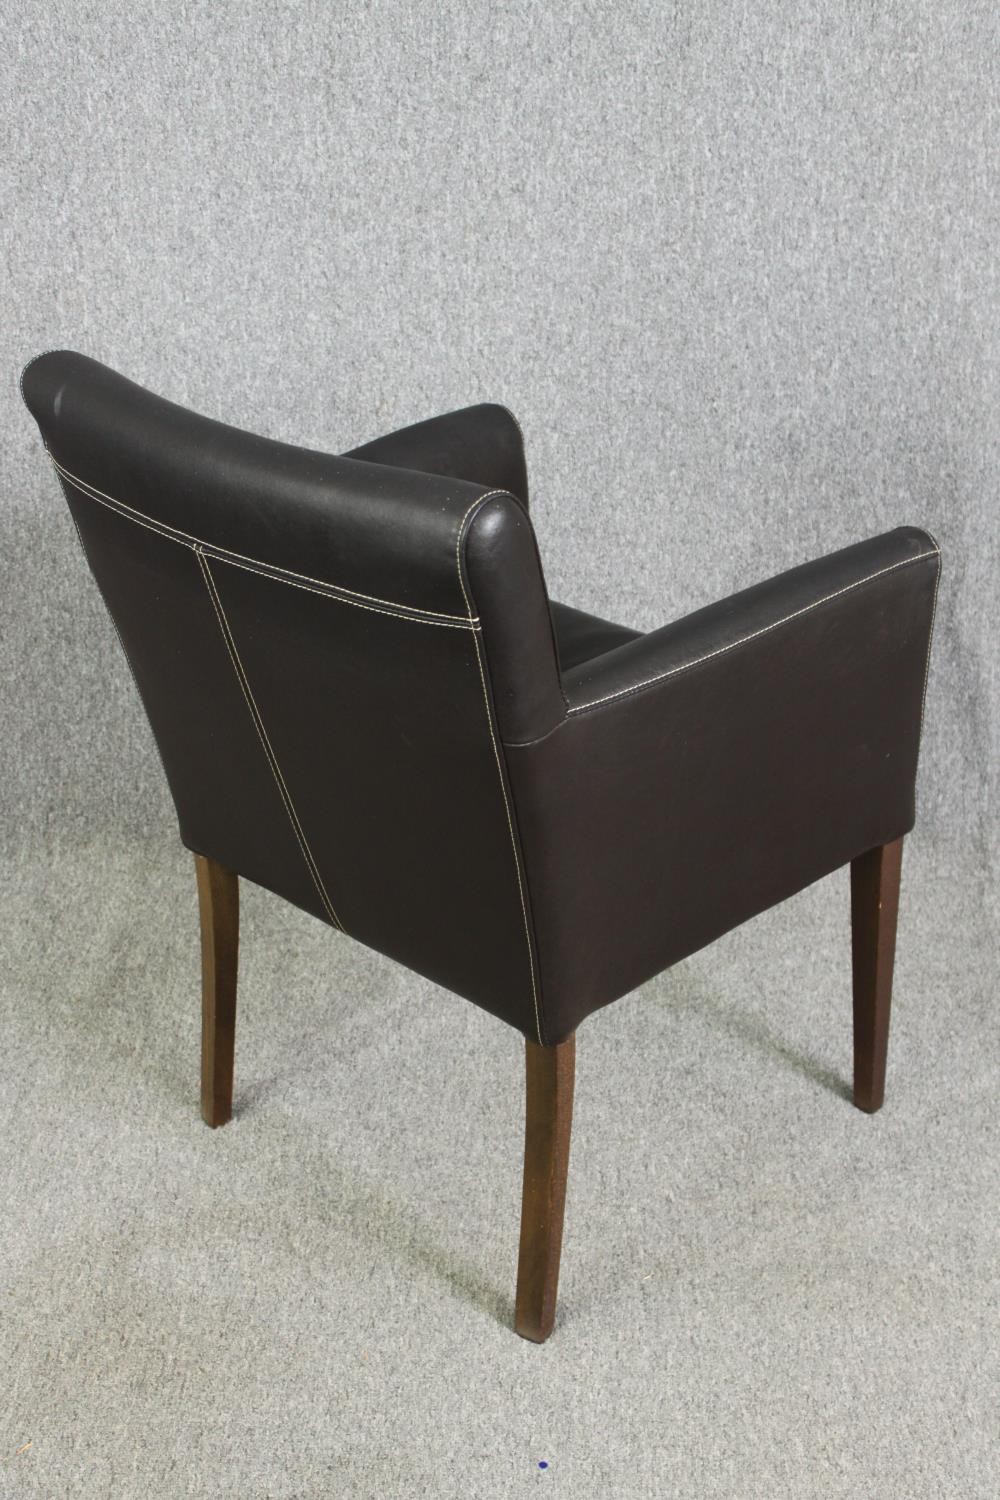 A set of four leatherette upholstered dining chairs. - Image 6 of 7